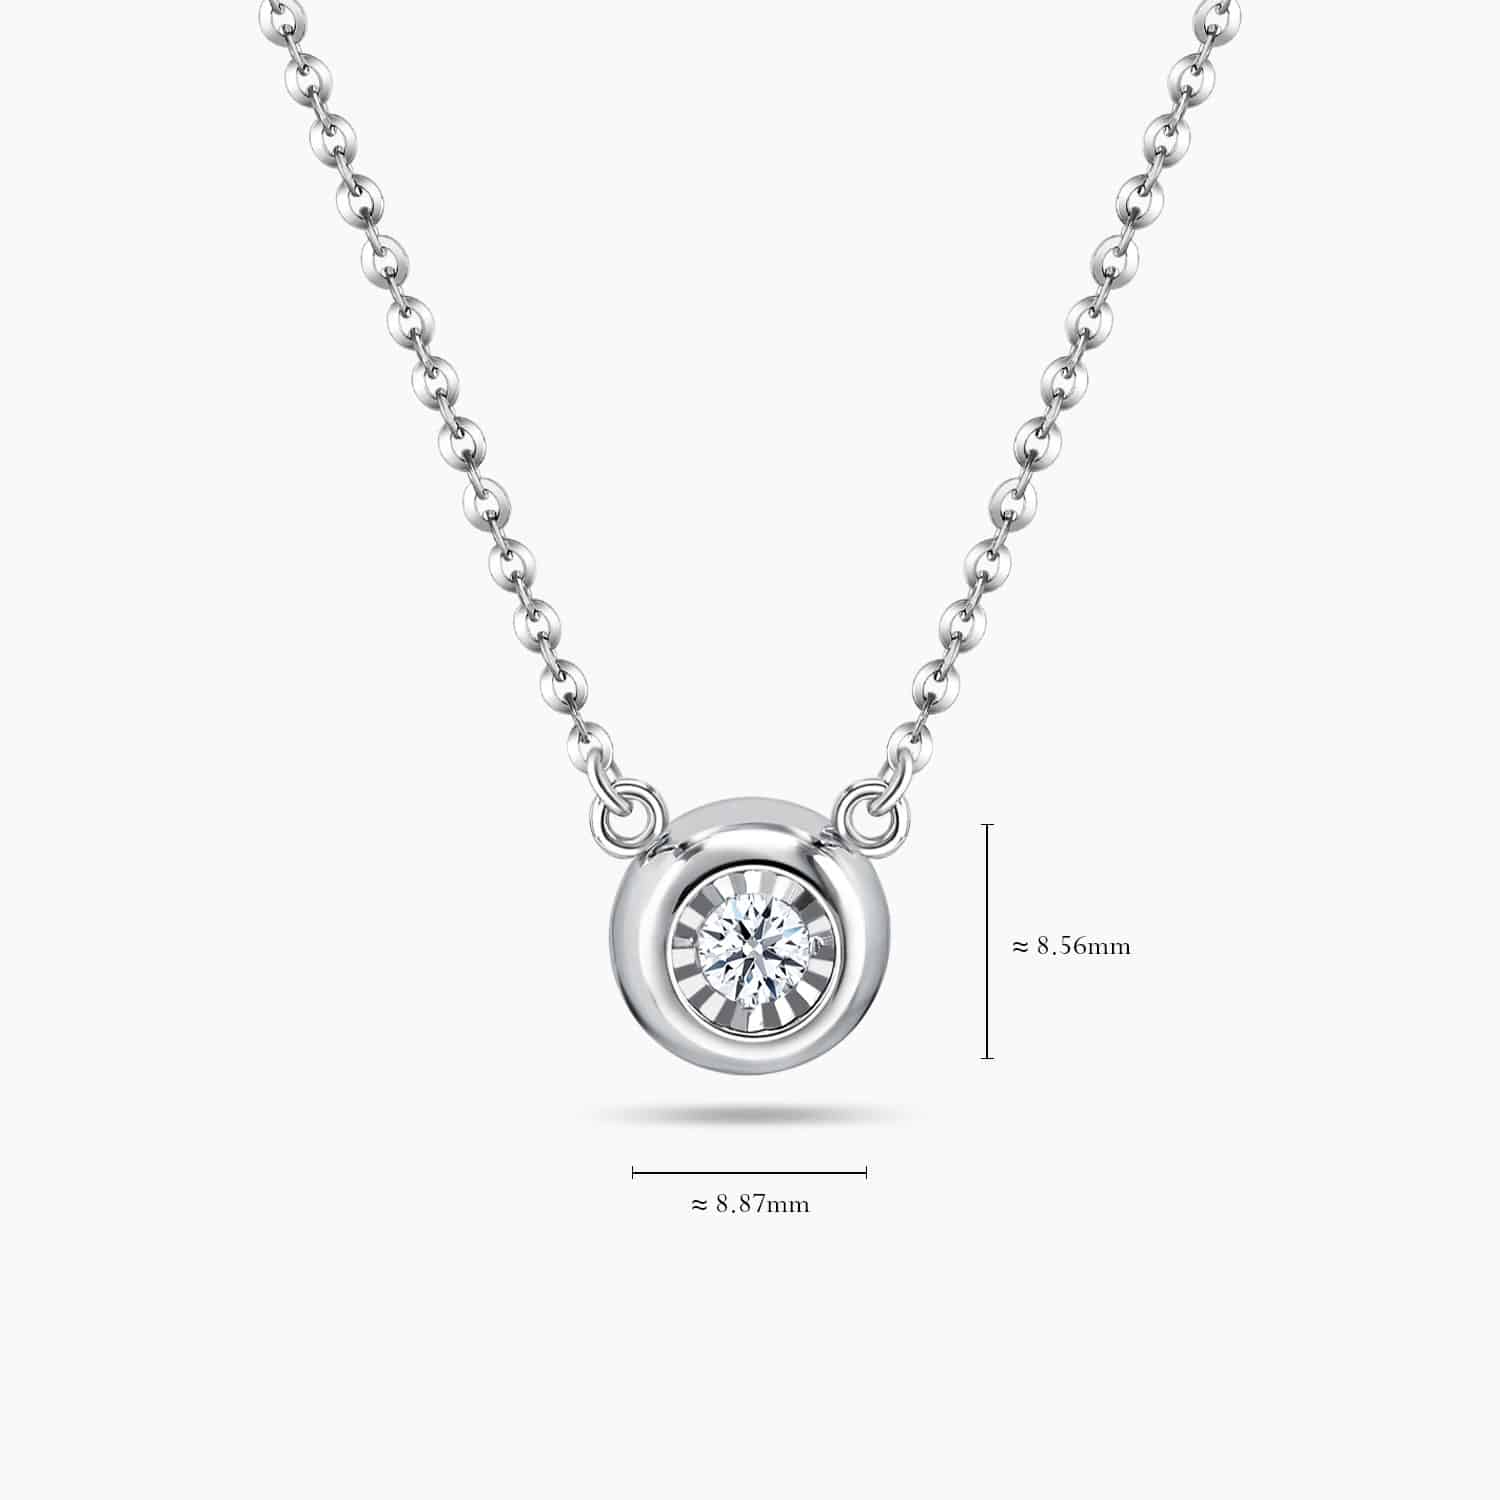 LVC Charmes Circlet Necklace a single round solitaire diamond encrusted in a circlet of 18k white gold